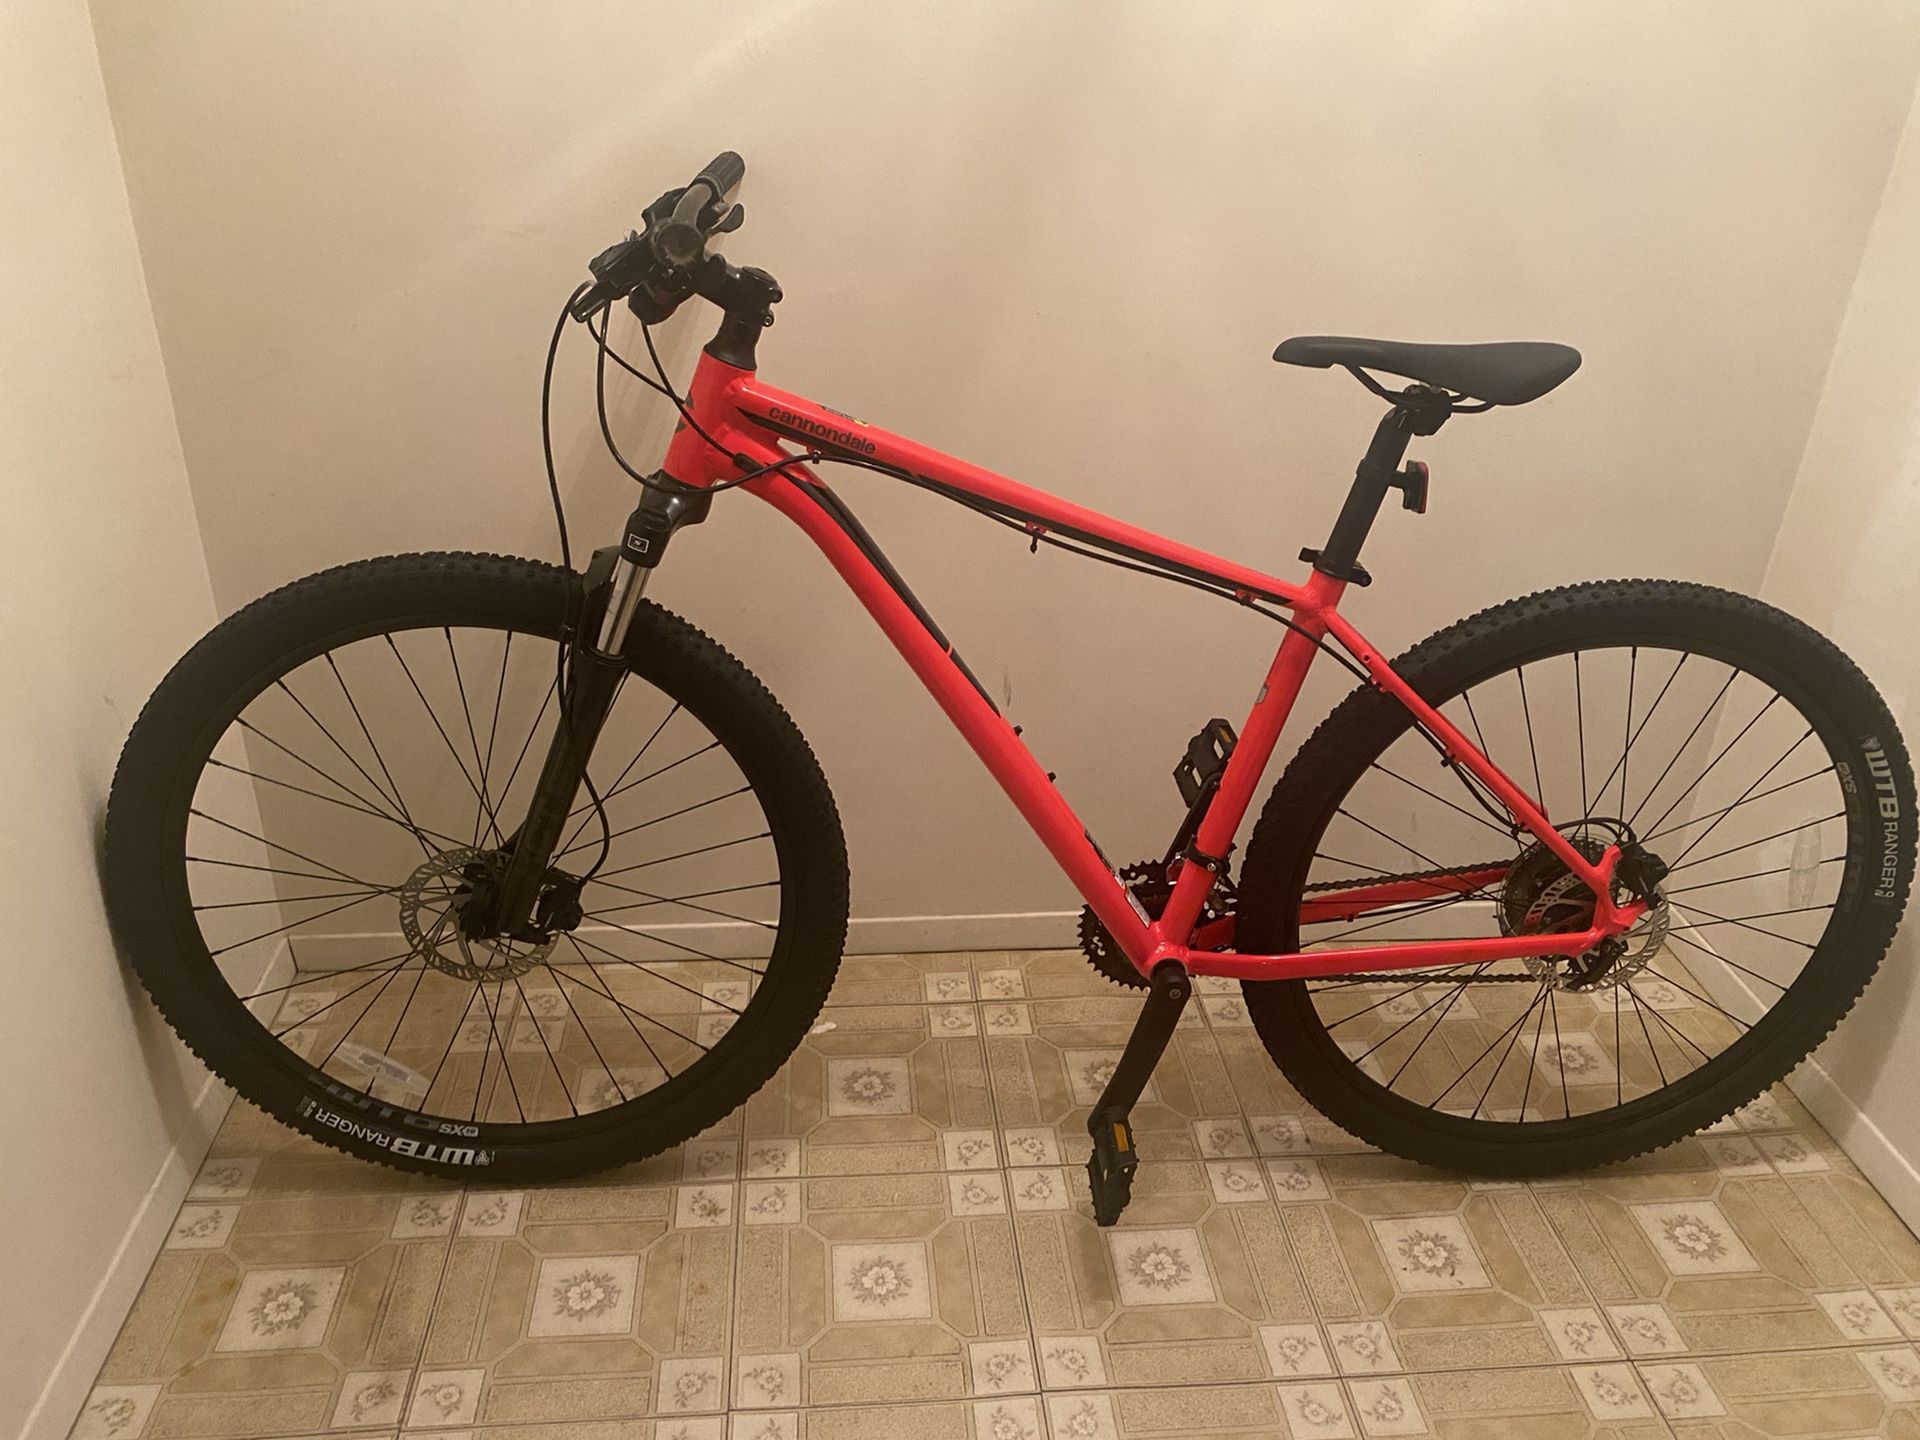 2020 Cannondale Trail 29er Bicycle Brand New Bike